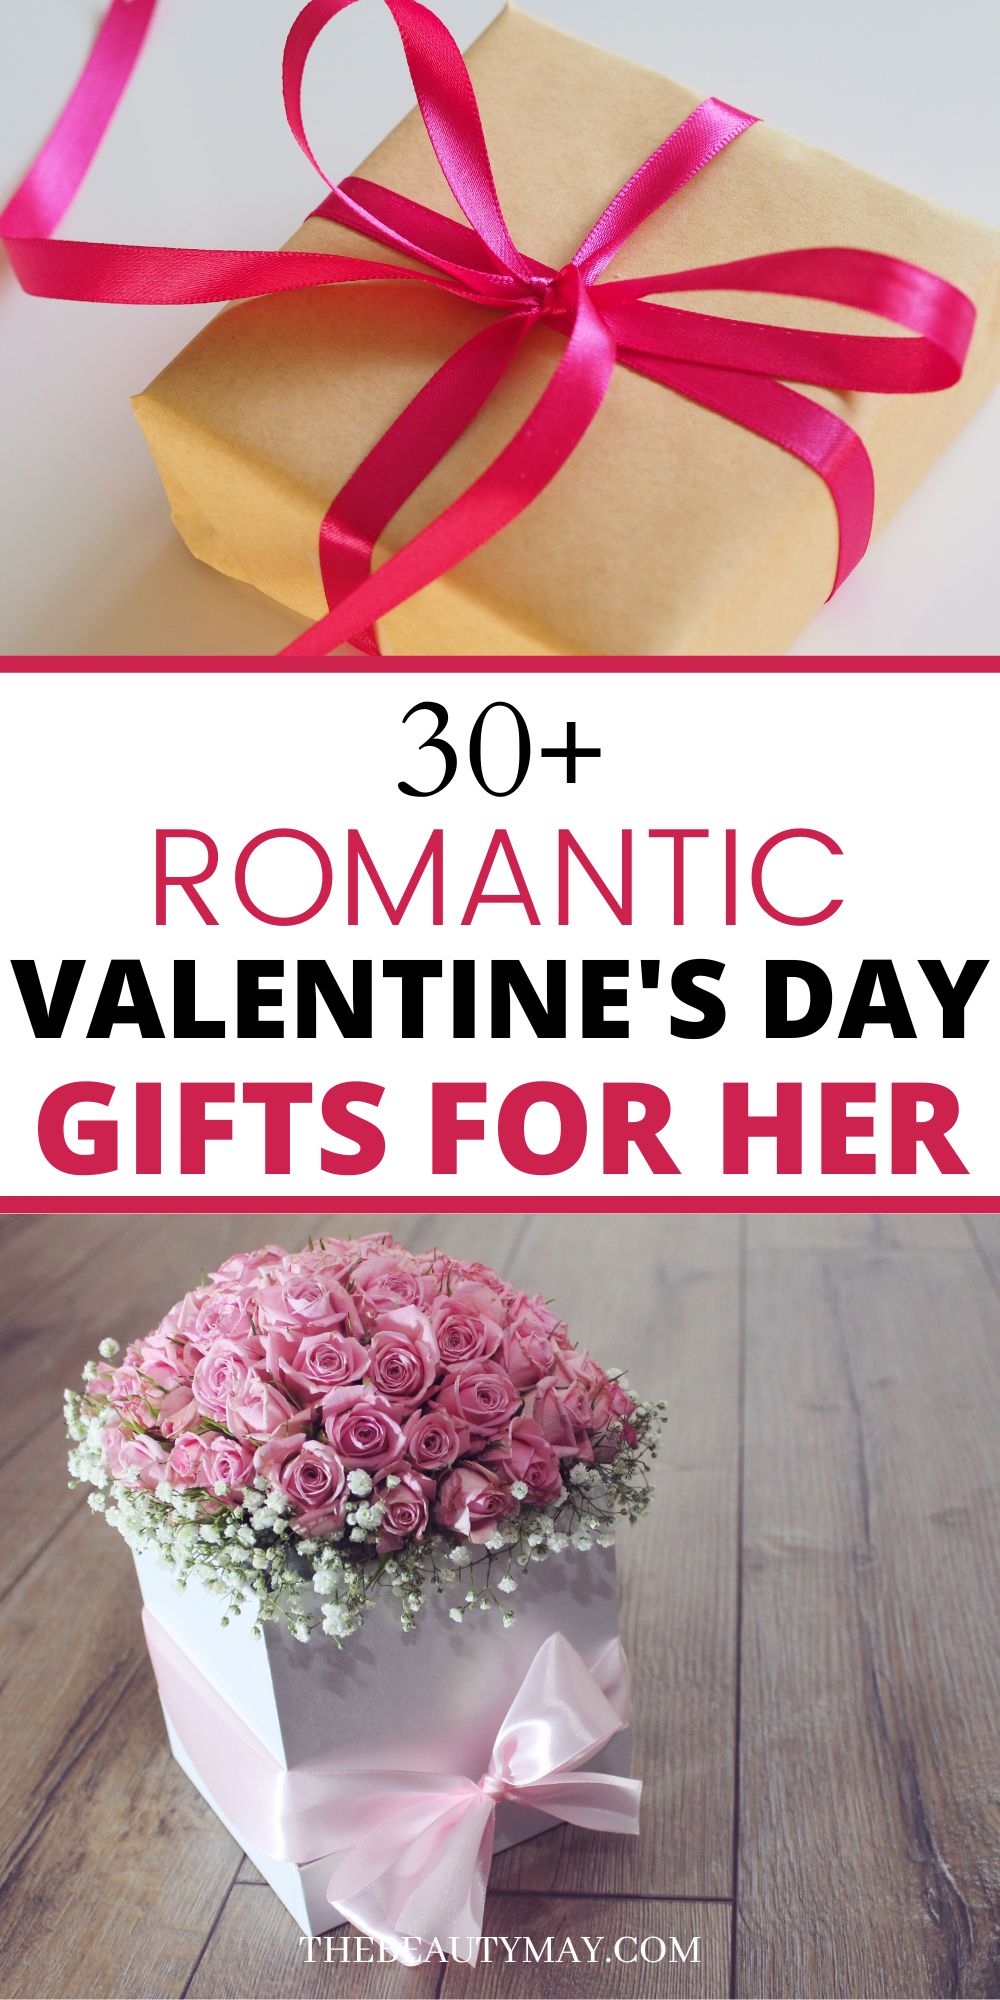 10 Cute Valentine's Day Gifts for Her